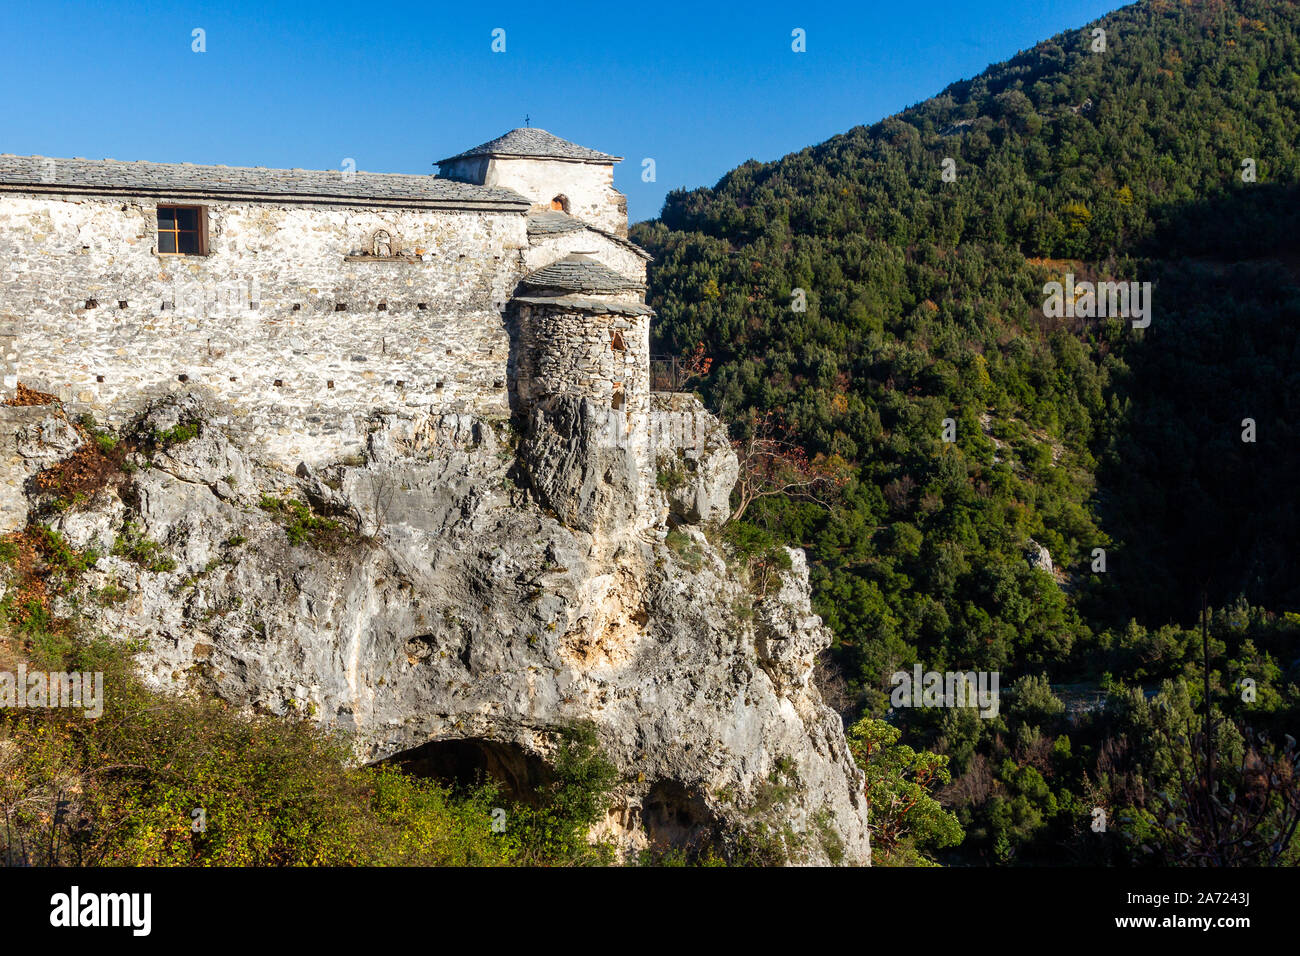 The church of the abandoned monastery of Agia Triada, hanging over a cliff, on the slopes of Mount Olympus, Pieria, Greece. Stock Photo